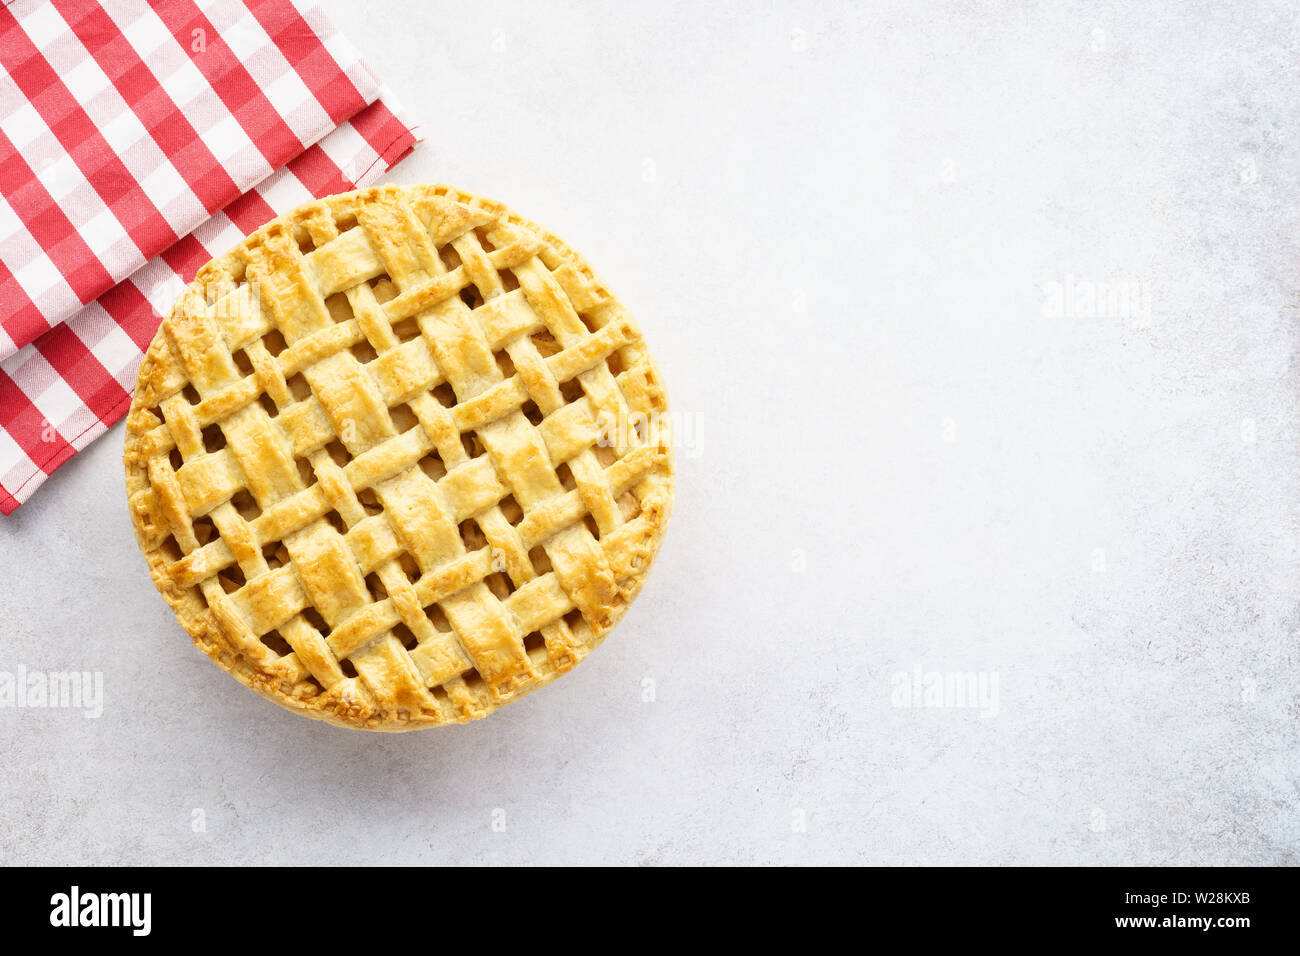 Baked apple pie and red checkered tablecloth on light gray background. Blank space for text. Stock Photo